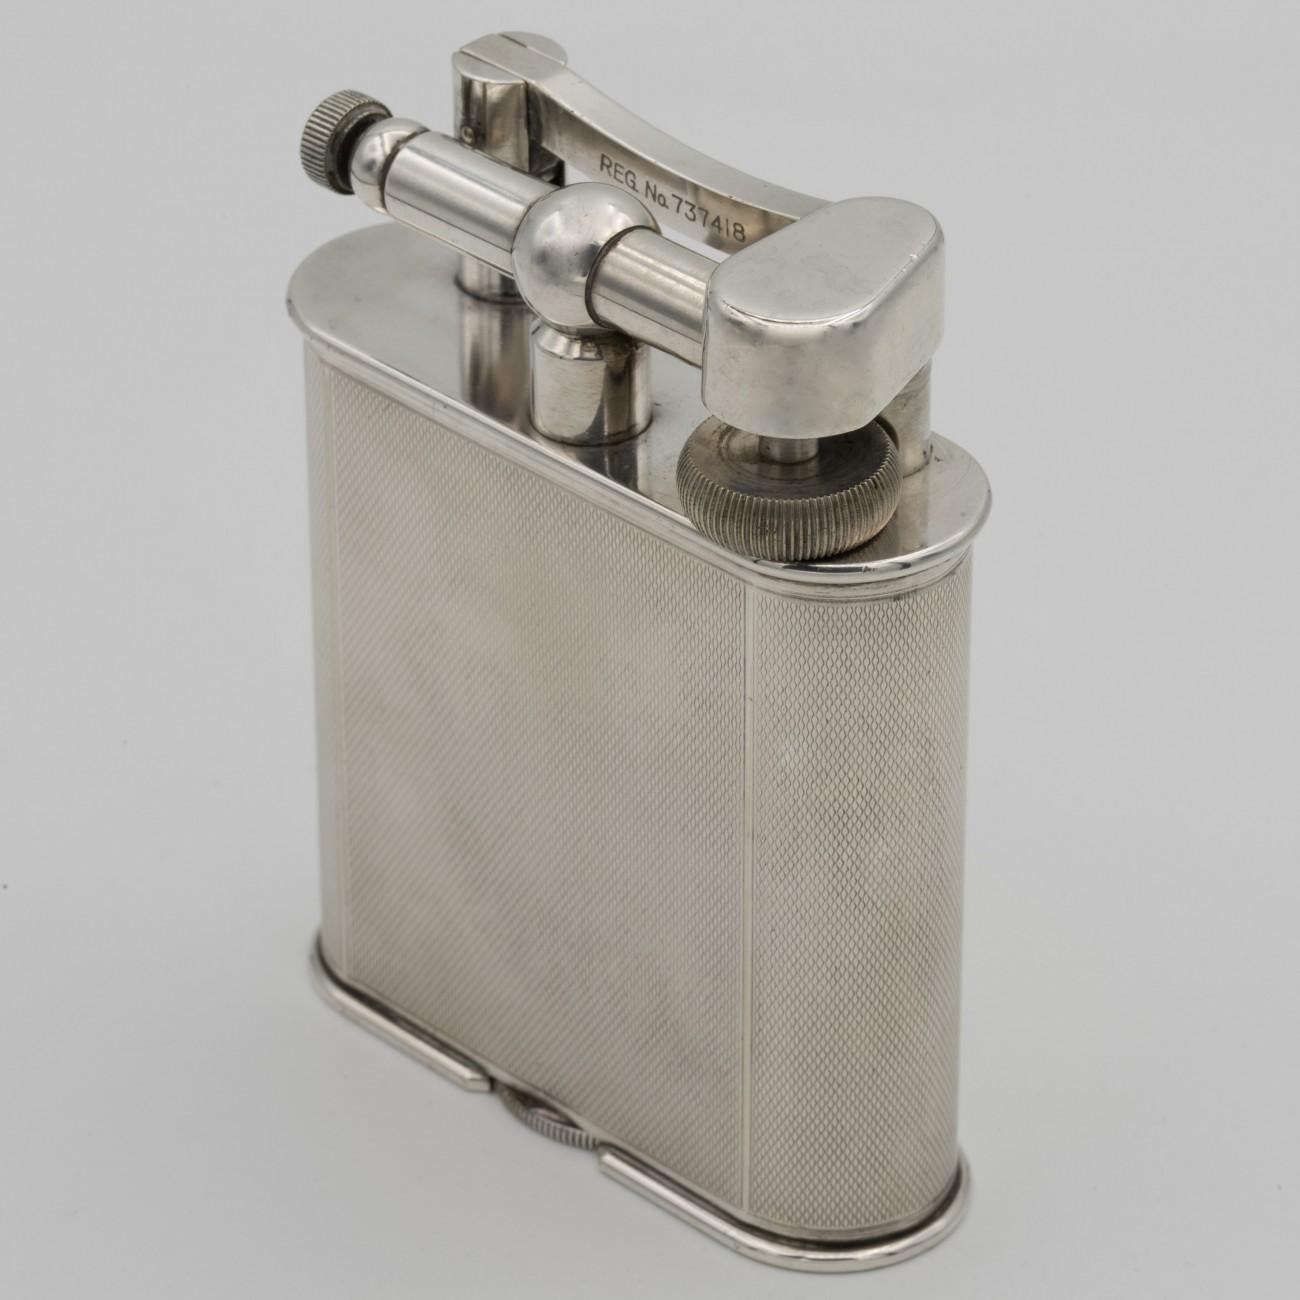 Mid-20th Century Dunhill 'Giant' Lighter with Silver Plated Engine Turned Finish, circa 1948